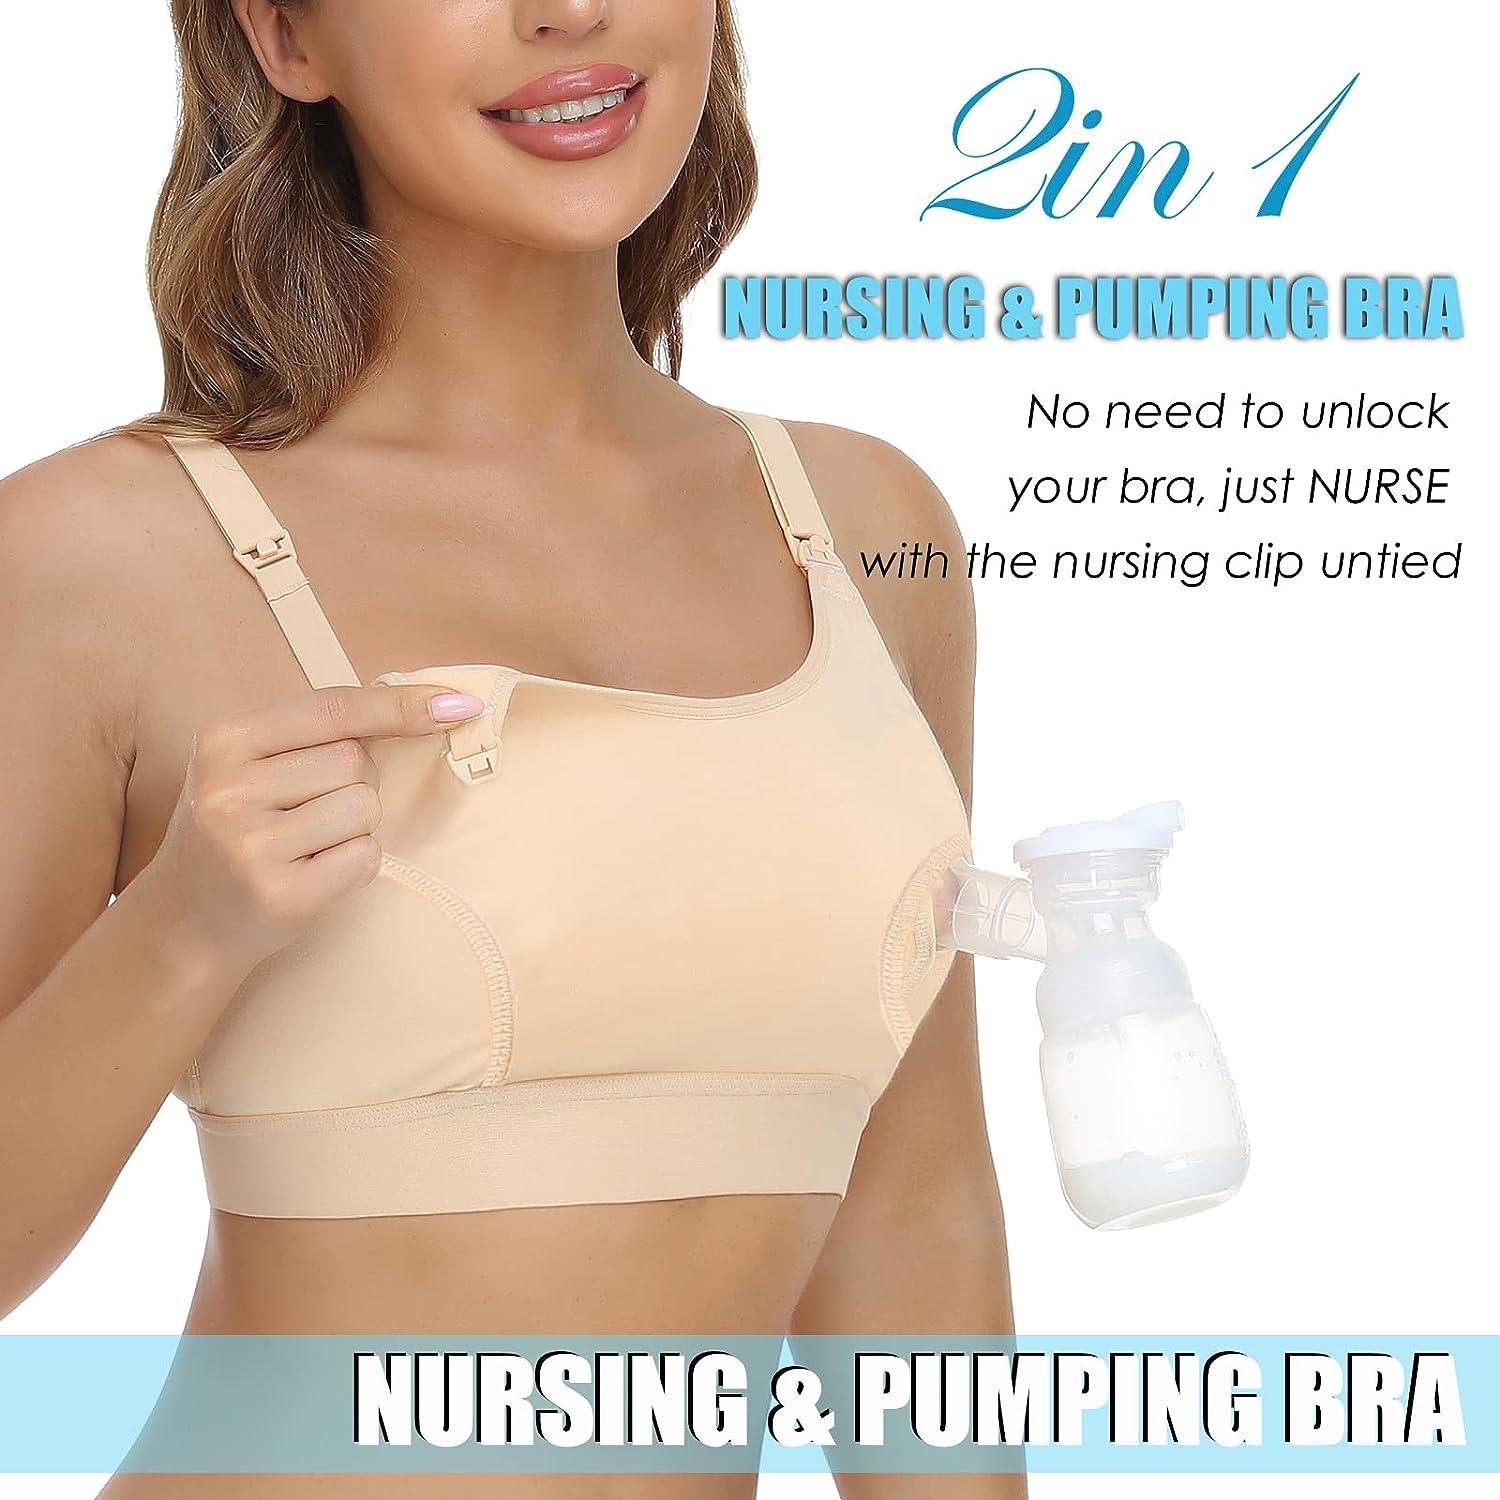  Hands Free Pumping Bra, Adjustable Breast-Pumps Holding And  Nursing Bra, Suitable For Breastfeeding-Pumps By Lansinoh, Philips Avent,  Spectra, Evenflo And More Blue